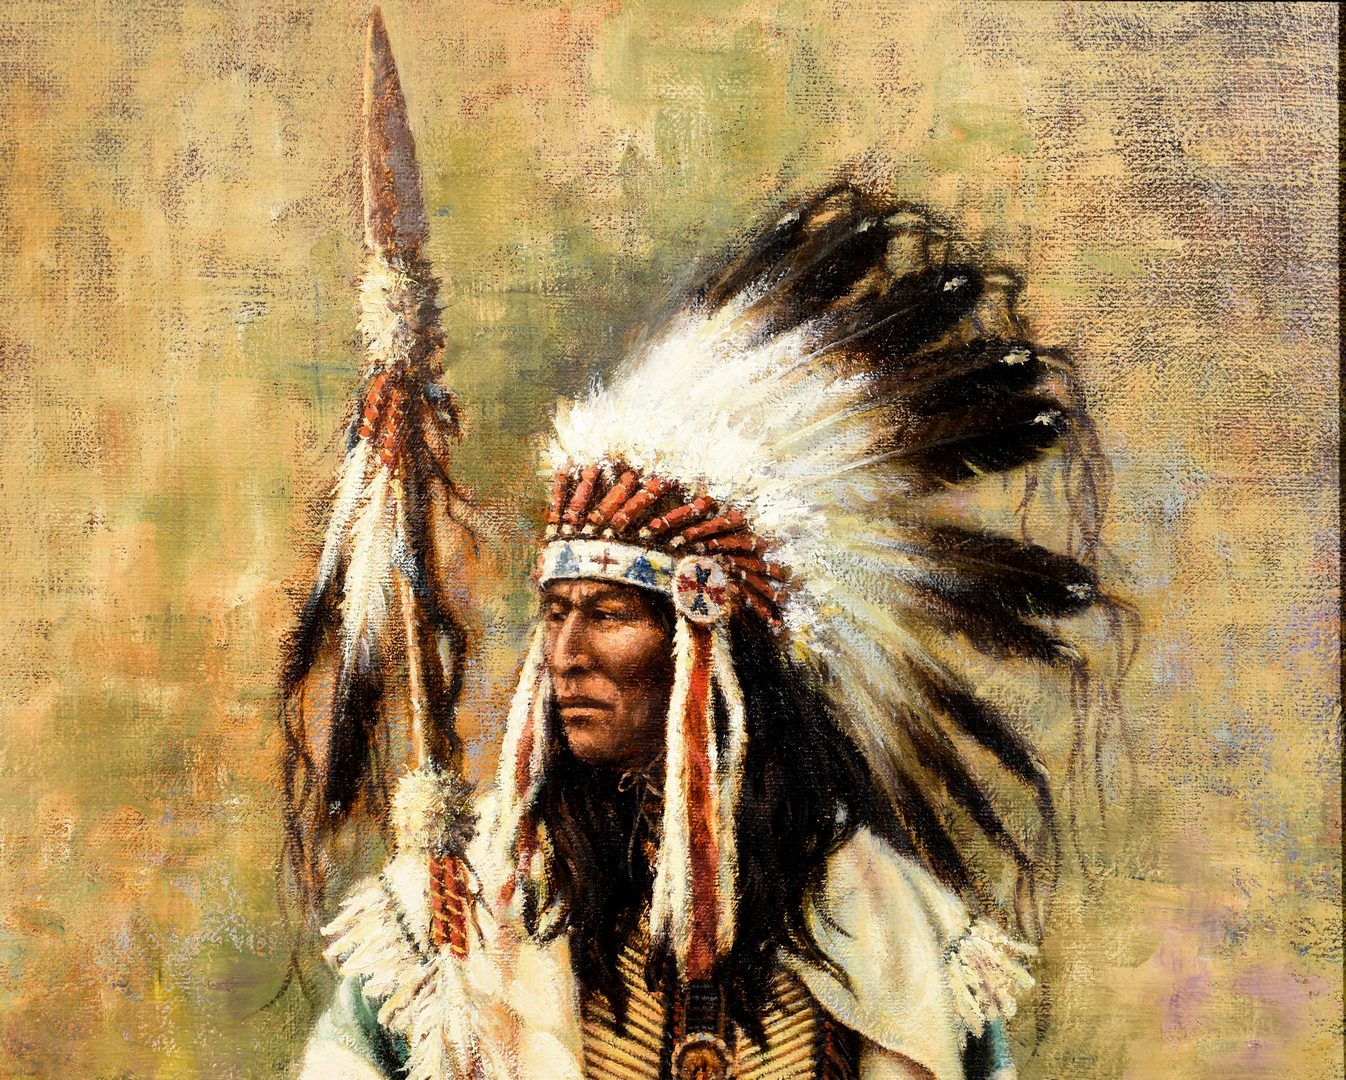 Lot 610: M. Martensen, large oil of Indian Chief